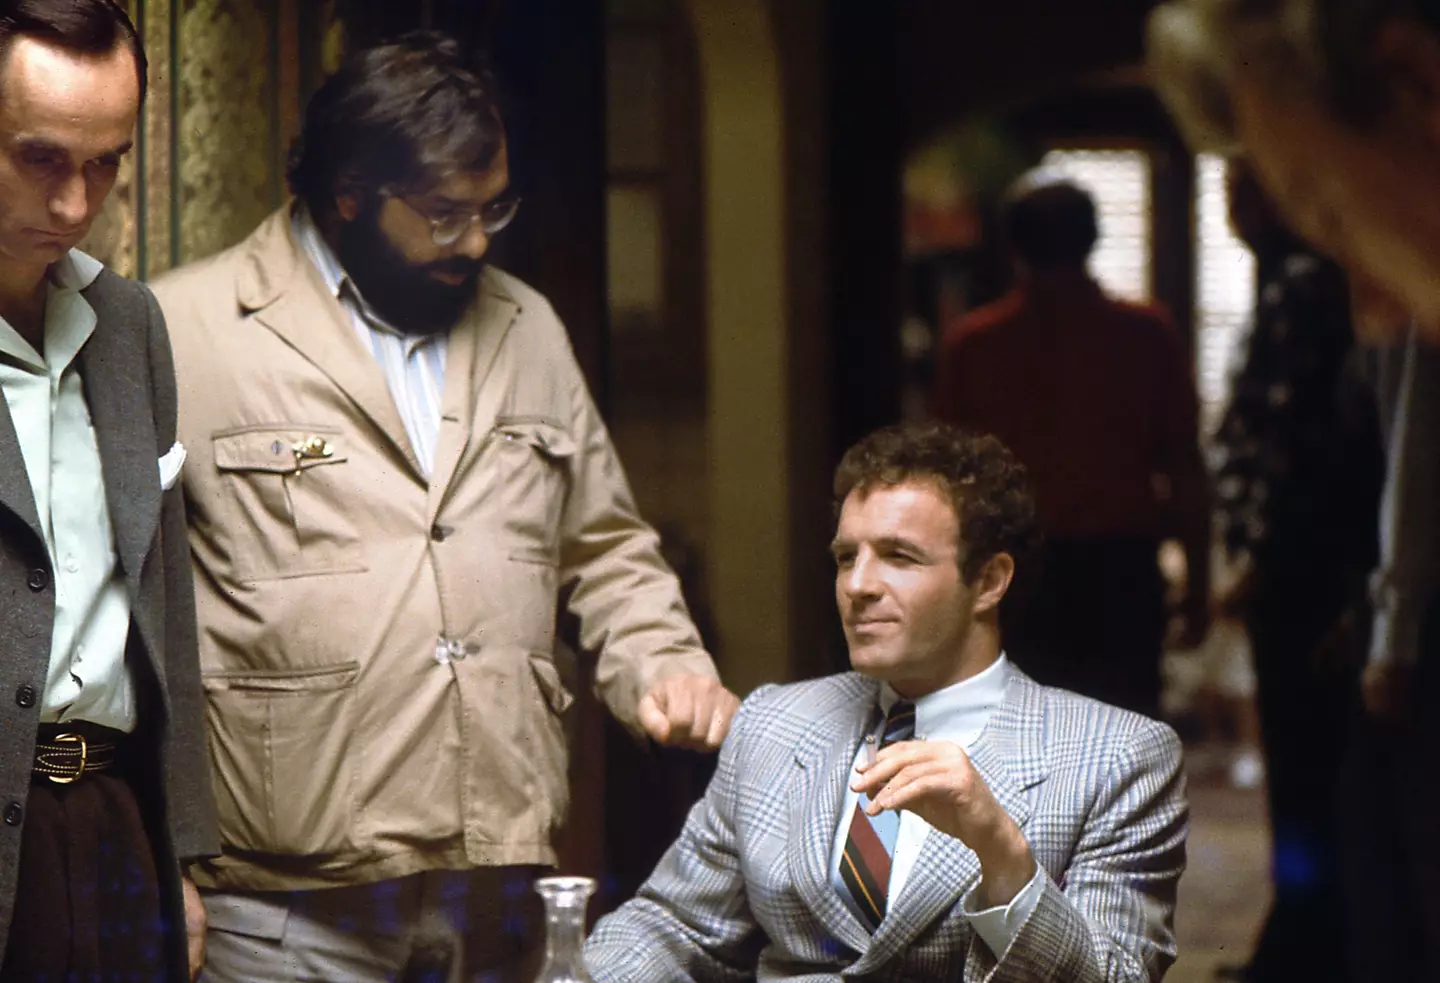 Actor James Caan alongside Godfather director Francis Ford Coppola.